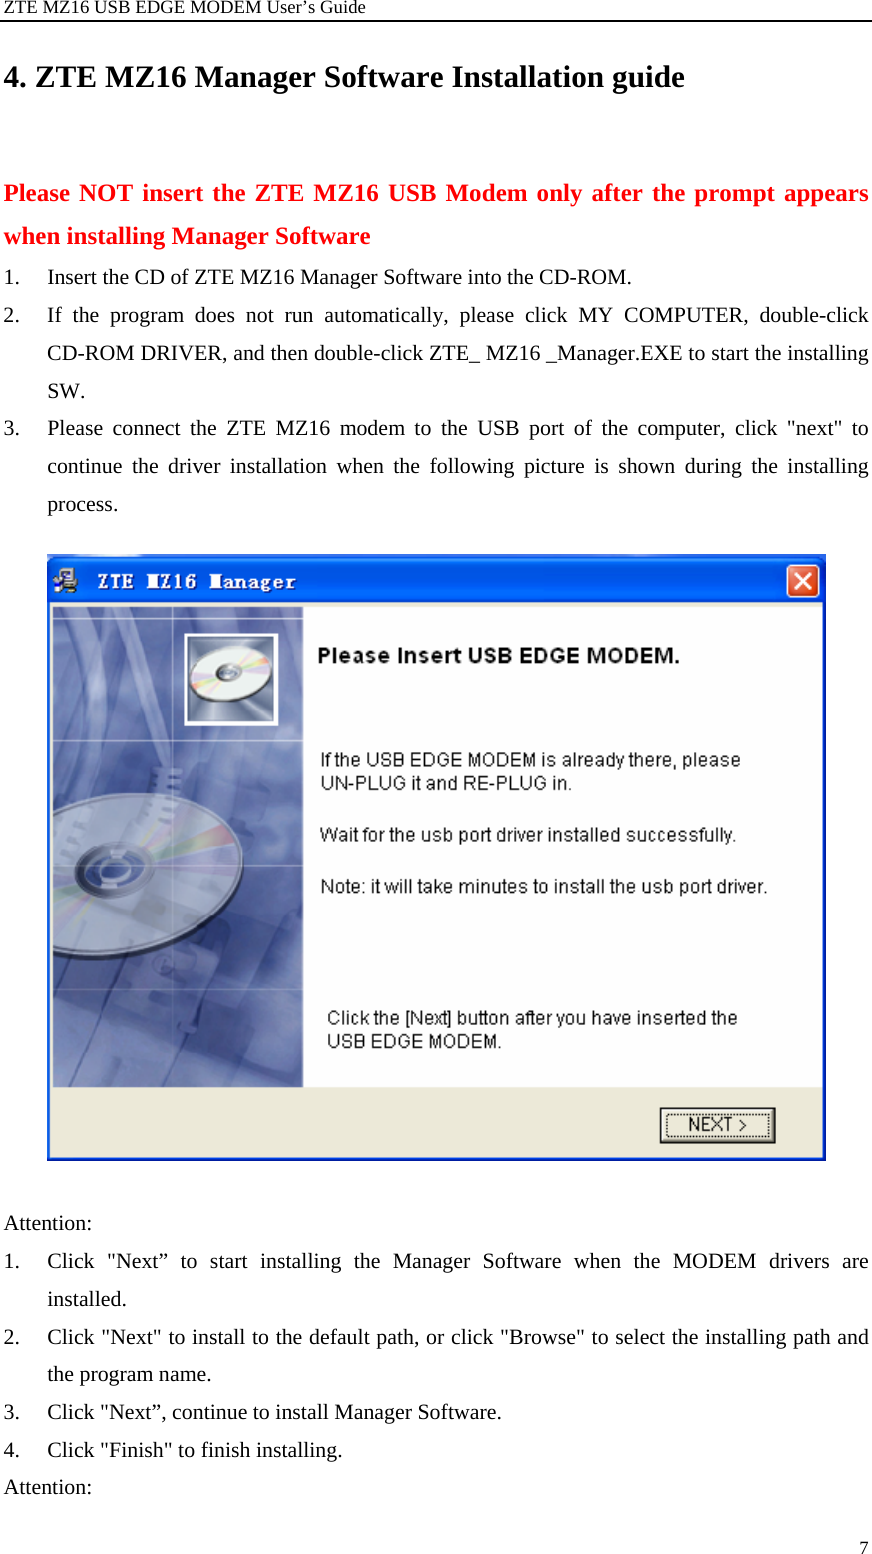 ZTE MZ16 USB EDGE MODEM User’s Guide 7 4. ZTE MZ16 Manager Software Installation guide Please NOT insert the ZTE MZ16 USB Modem only after the prompt appears when installing Manager Software   1. Insert the CD of ZTE MZ16 Manager Software into the CD-ROM. 2. If the program does not run automatically, please click MY COMPUTER, double-click CD-ROM DRIVER, and then double-click ZTE_ MZ16 _Manager.EXE to start the installing SW. 3. Please connect the ZTE MZ16 modem to the USB port of the computer, click &quot;next&quot; to continue the driver installation when the following picture is shown during the installing process.     Attention:  1. Click &quot;Next” to start installing the Manager Software when the MODEM drivers are installed. 2. Click &quot;Next&quot; to install to the default path, or click &quot;Browse&quot; to select the installing path and the program name. 3. Click &quot;Next”, continue to install Manager Software. 4. Click &quot;Finish&quot; to finish installing. Attention:  